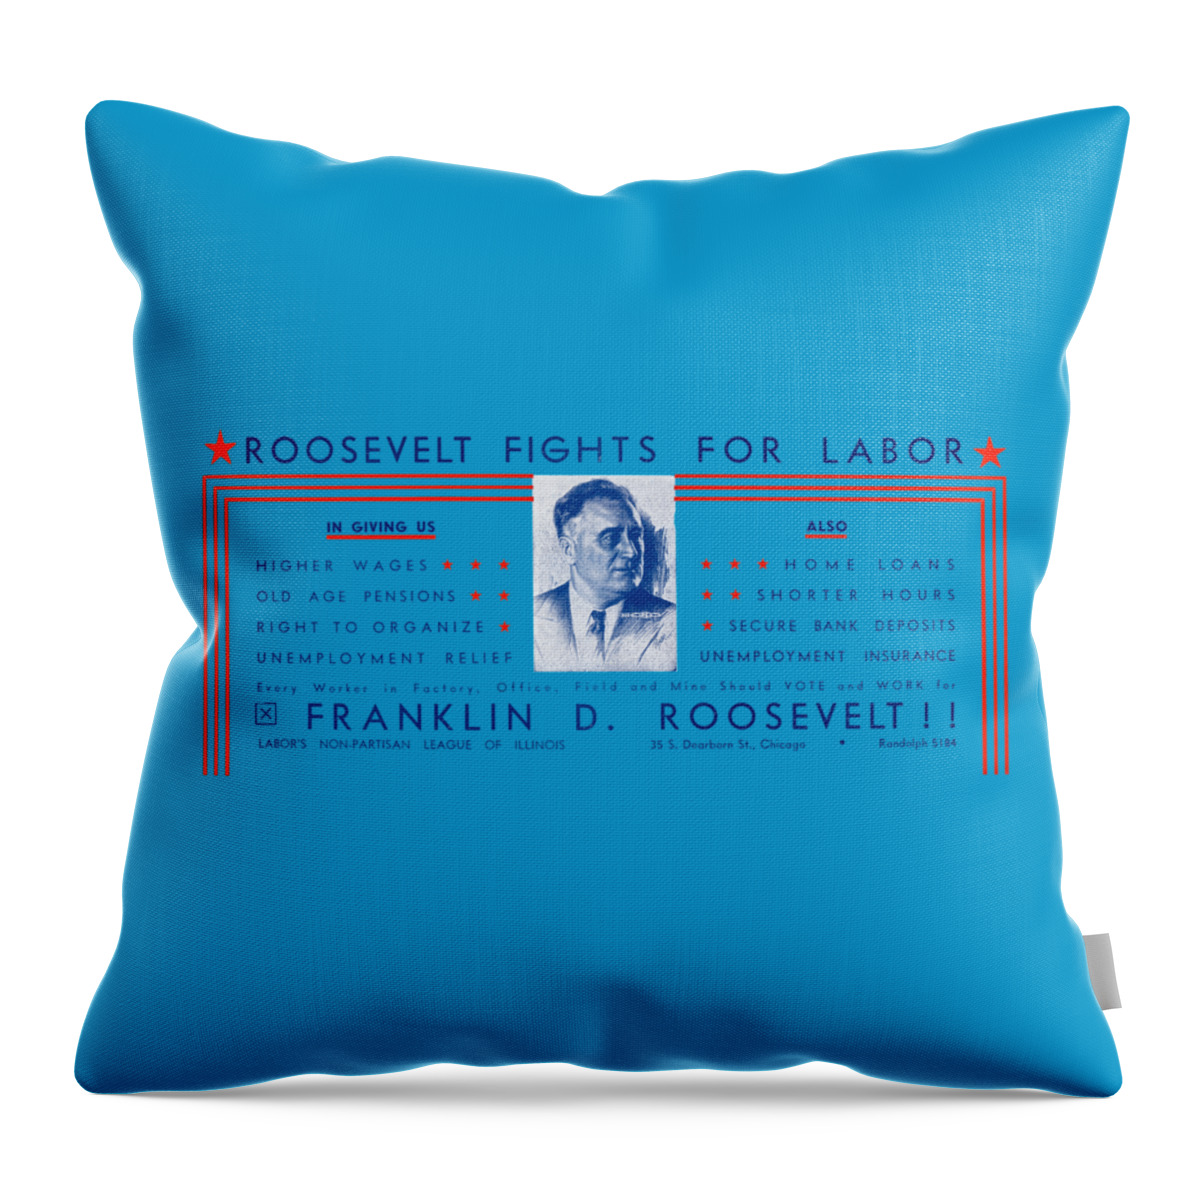 Franklin D Roosevelt Throw Pillow featuring the painting 1936 Roosevelt Fights For Labor by Historic Image